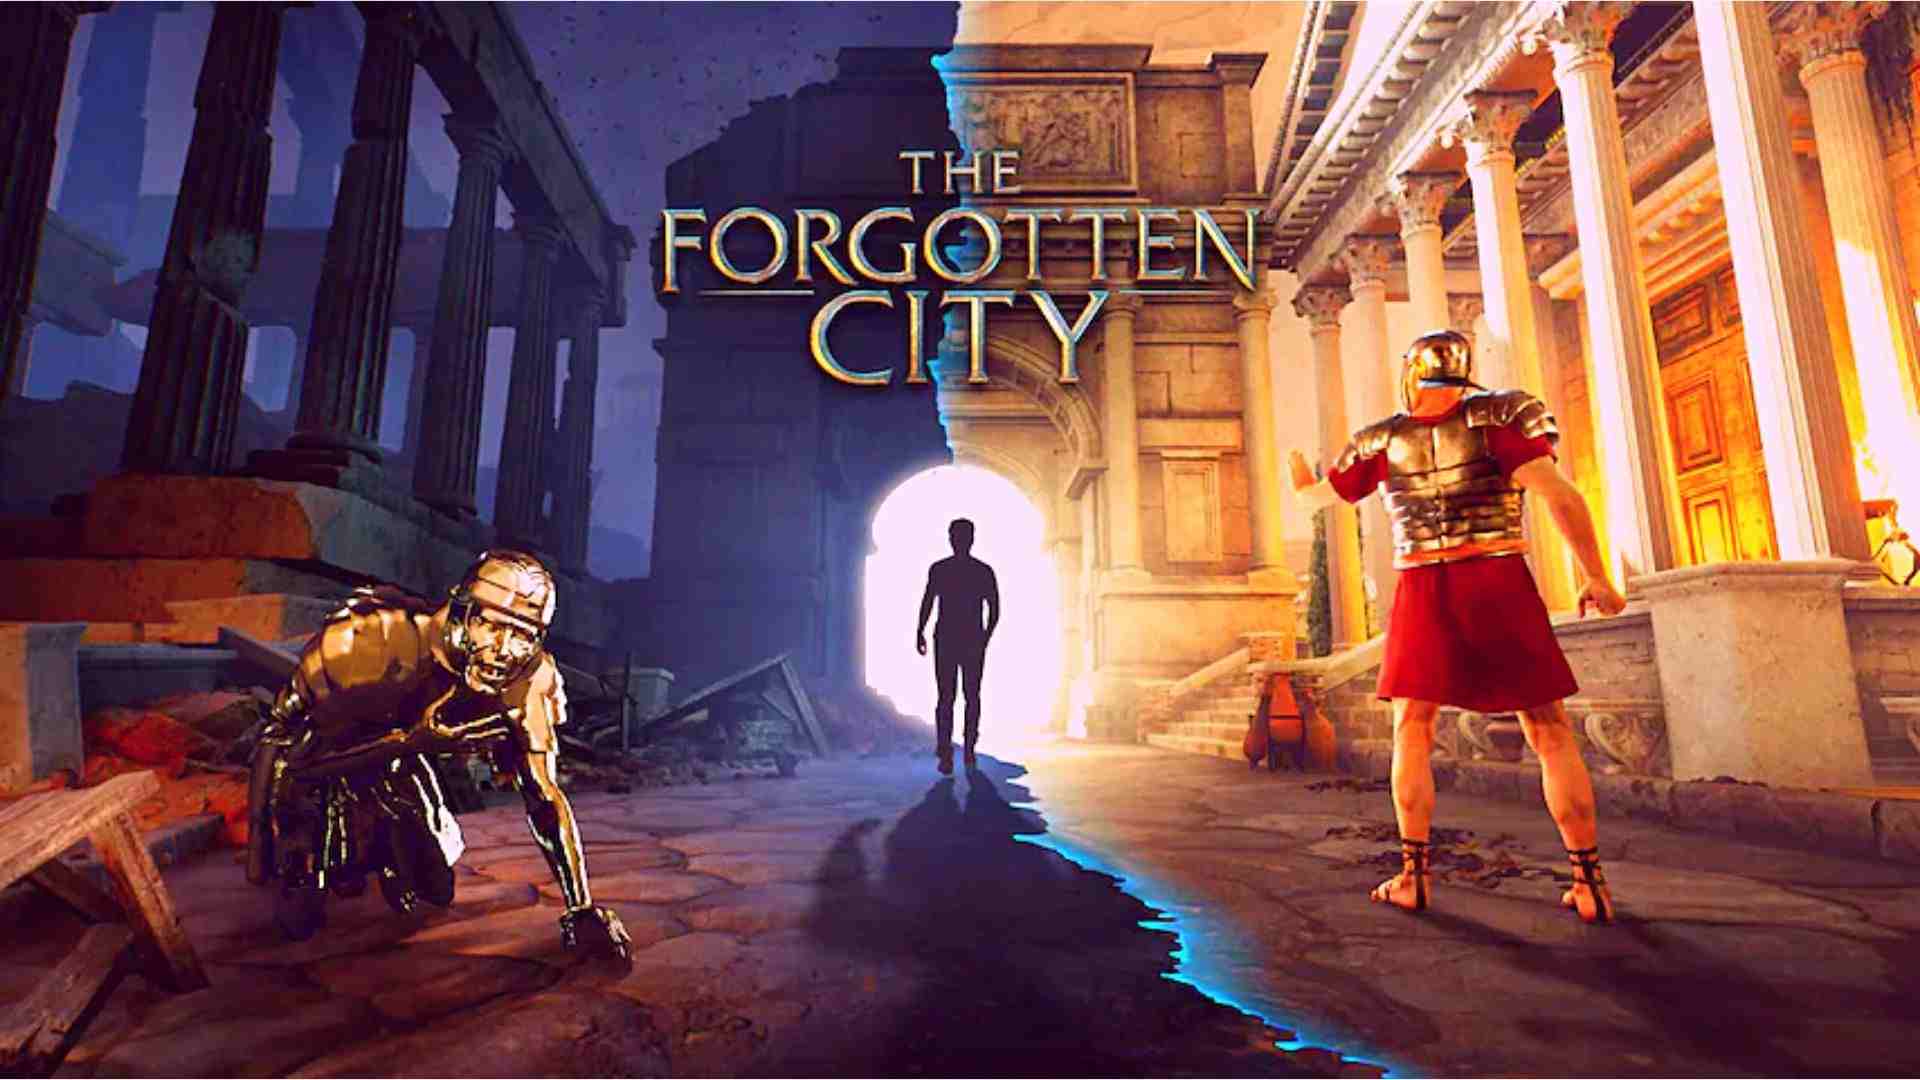 The Forgotten City Parents Guide and Age Rating